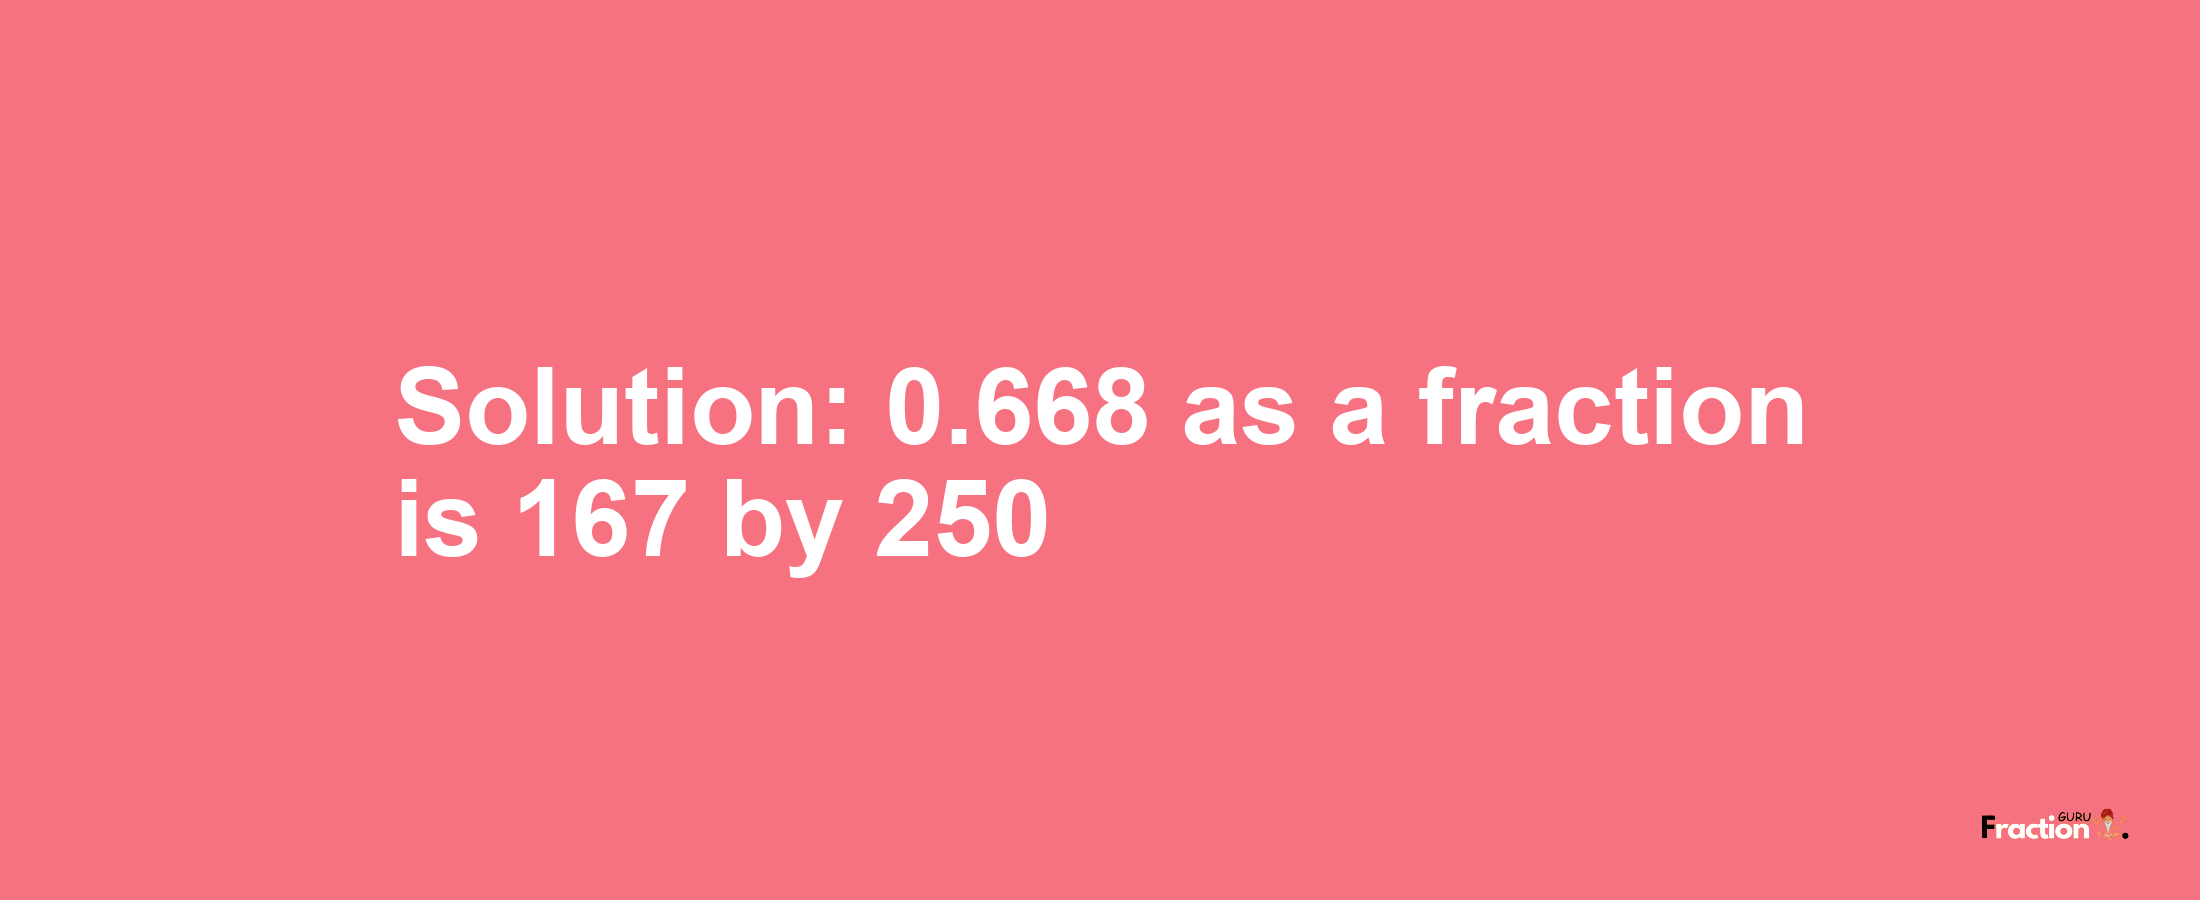 Solution:0.668 as a fraction is 167/250